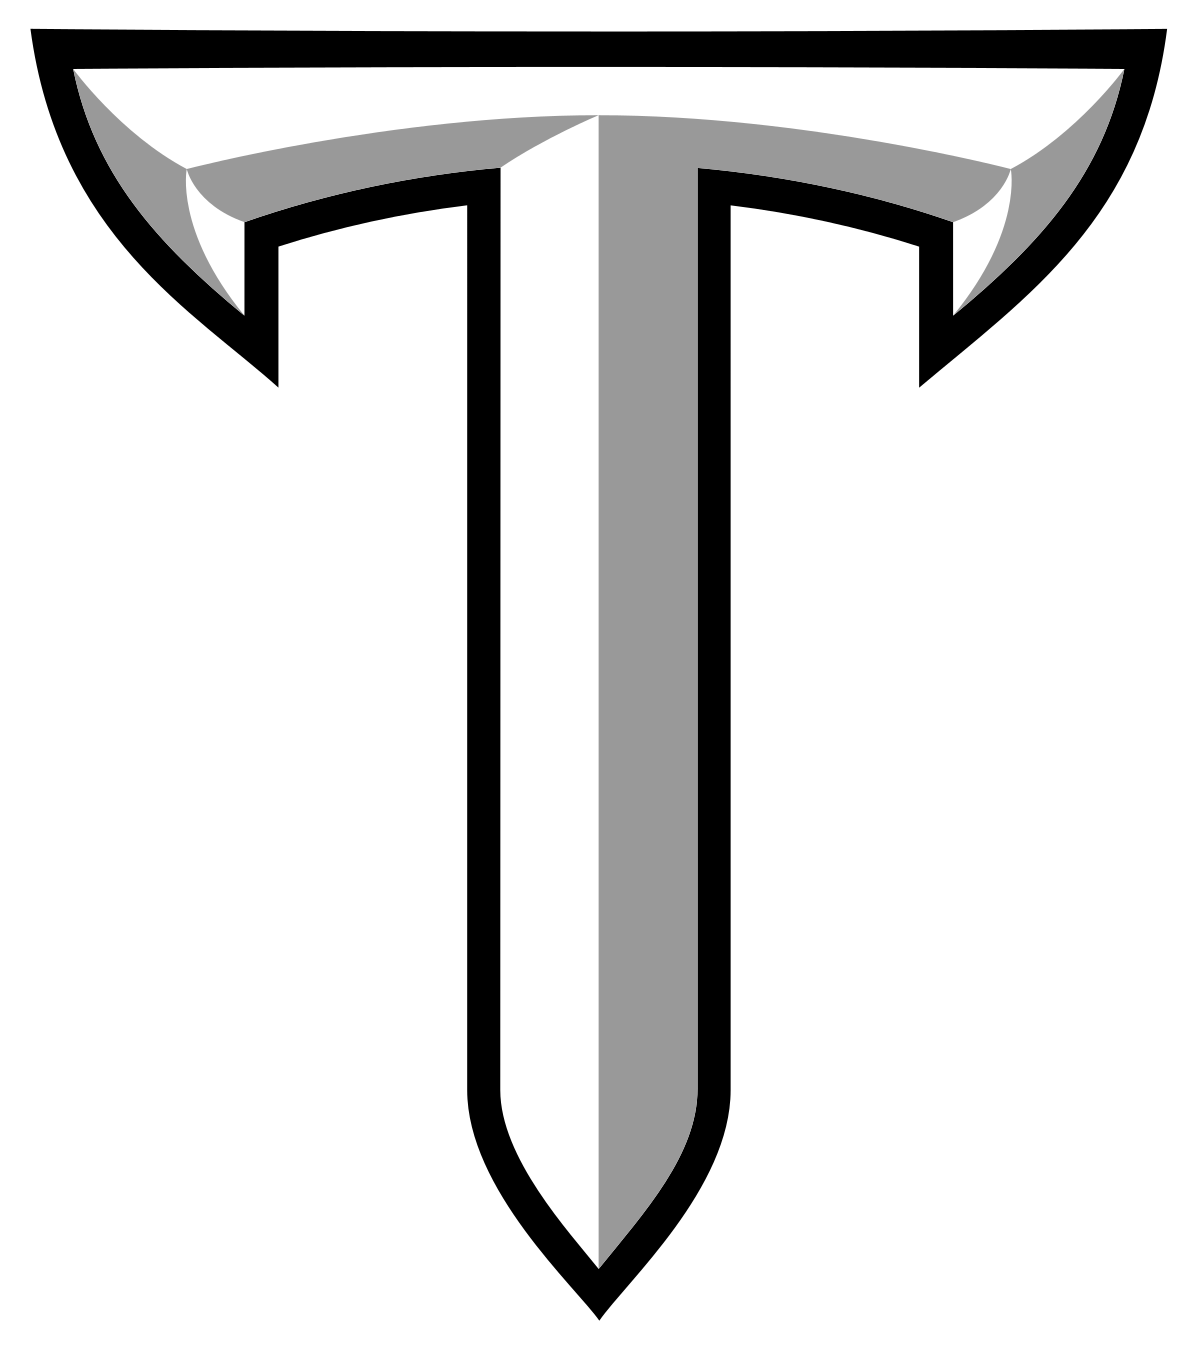 Logo of Troy University for our school profile